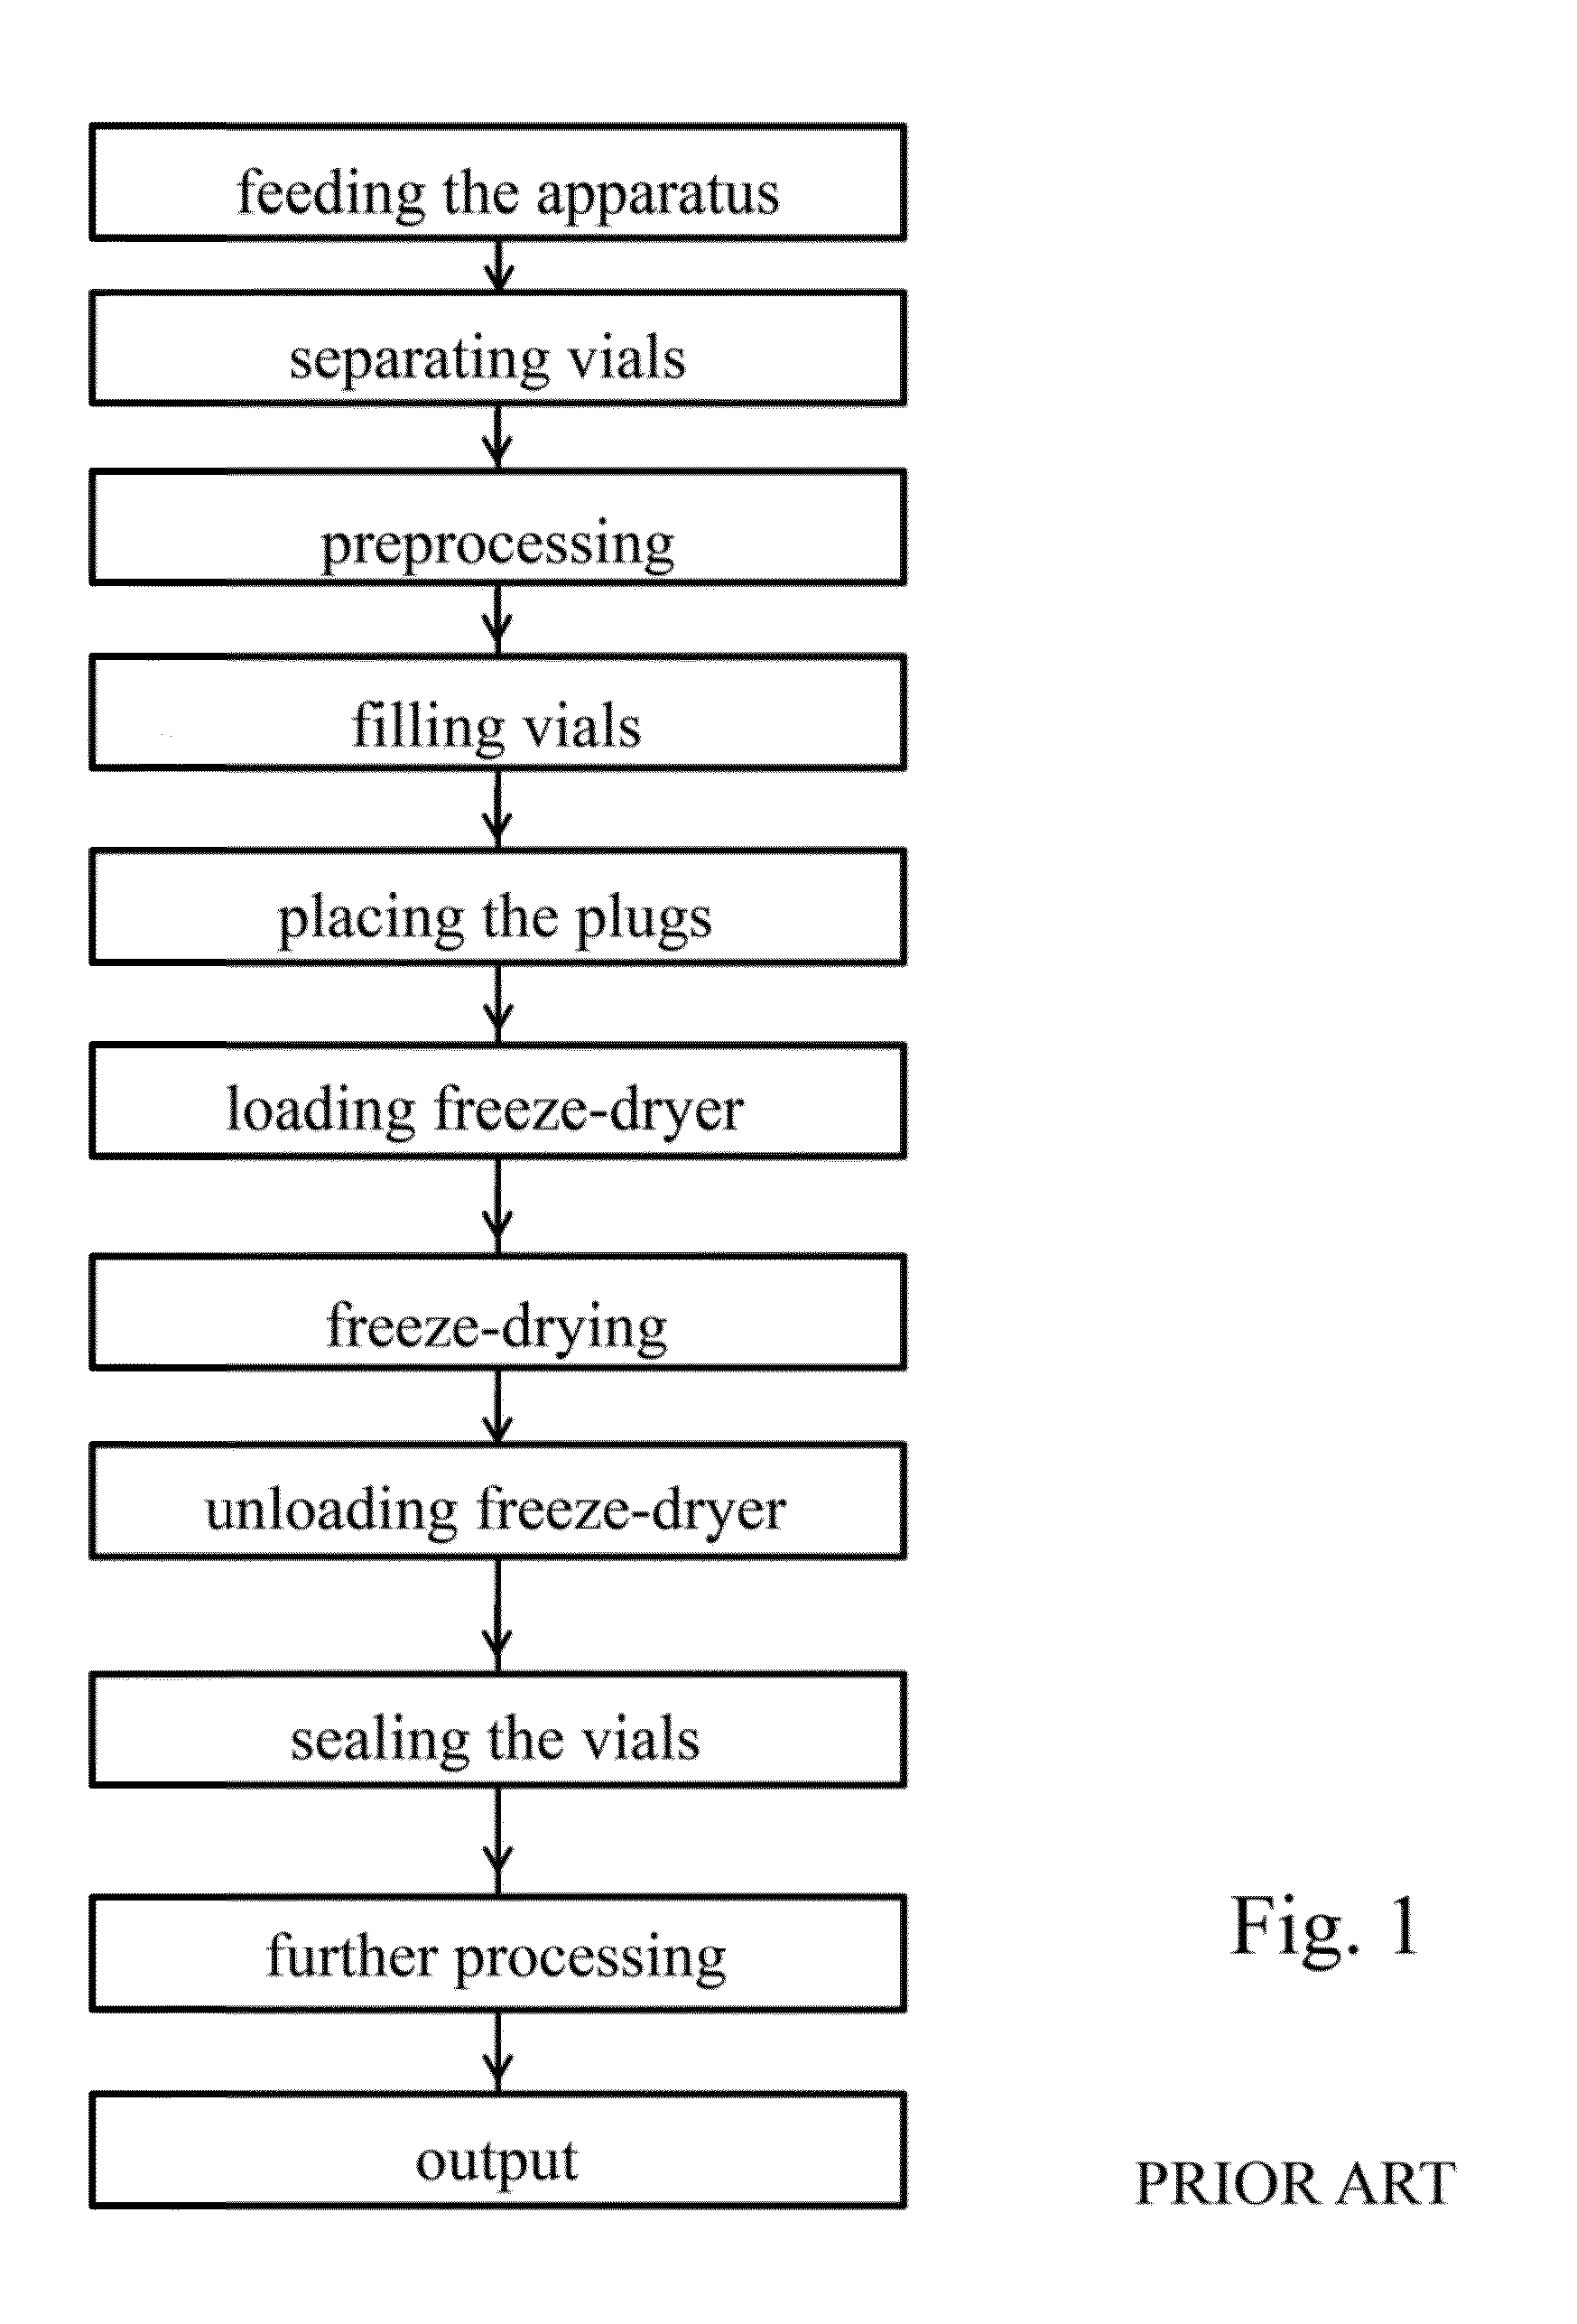 Process and apparatus for treating containers for storing substances for medical, pharmaceutical or cosmetic applications